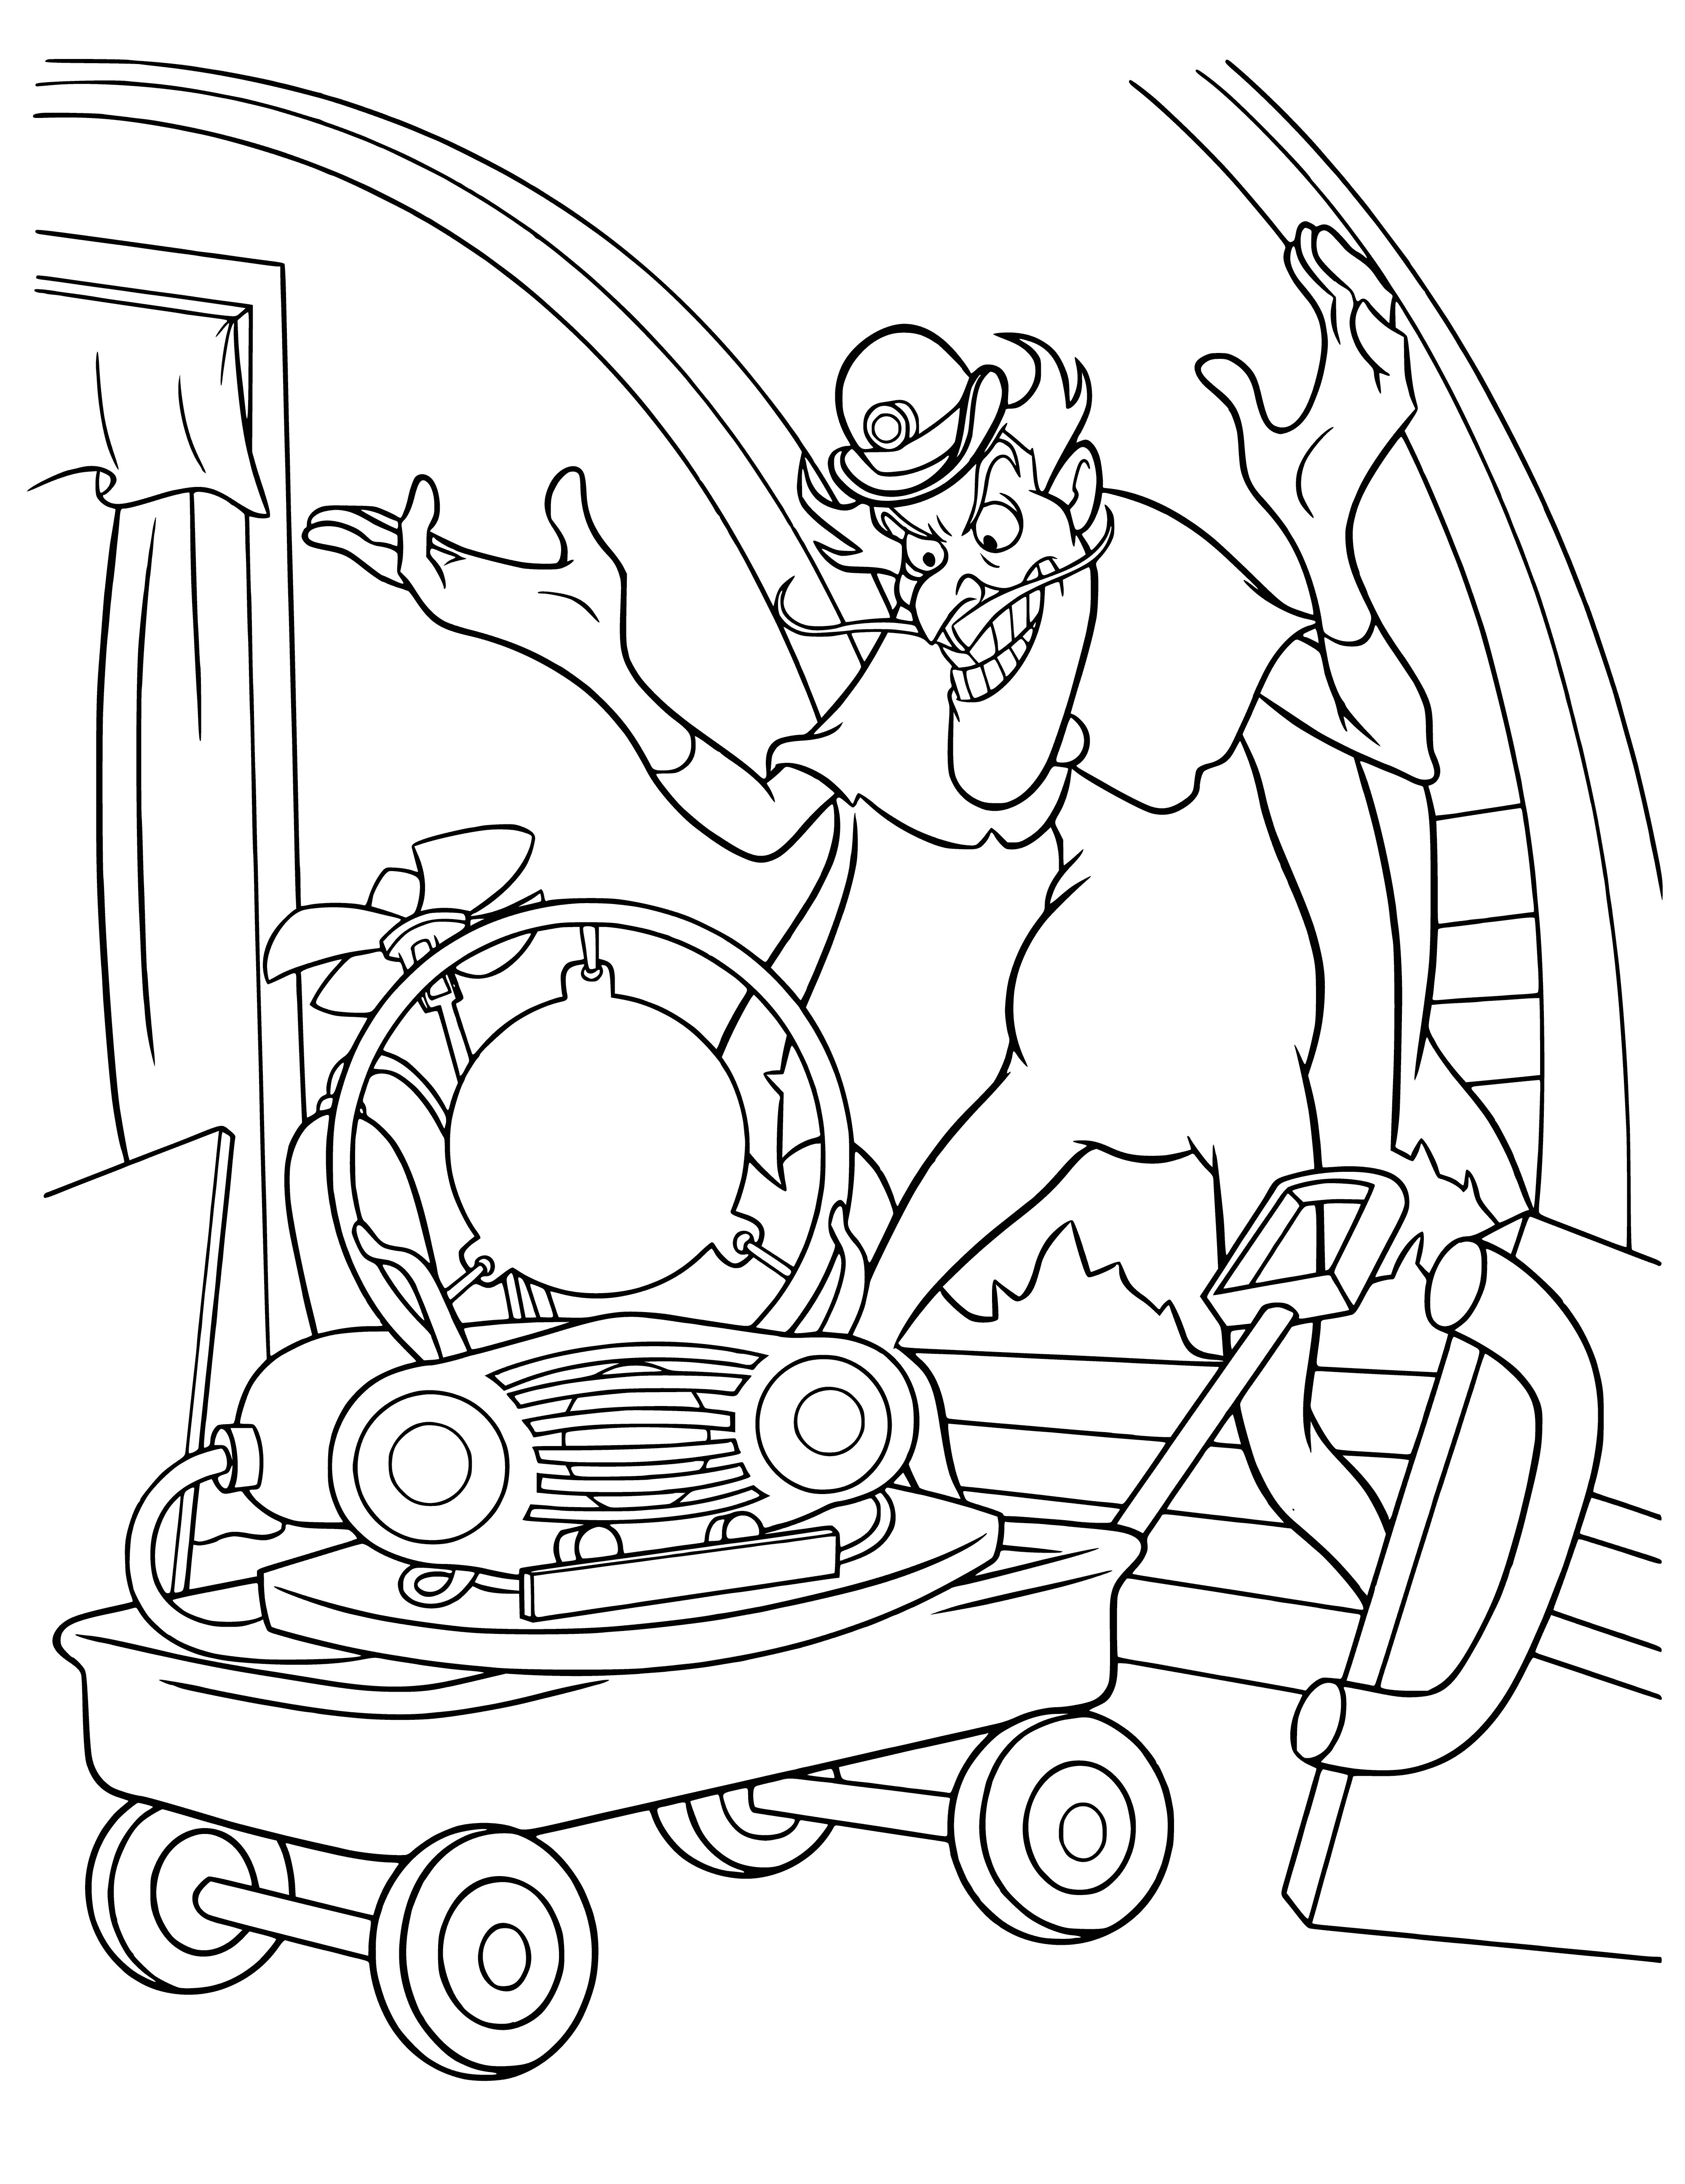 The villain stole the apparatus coloring page